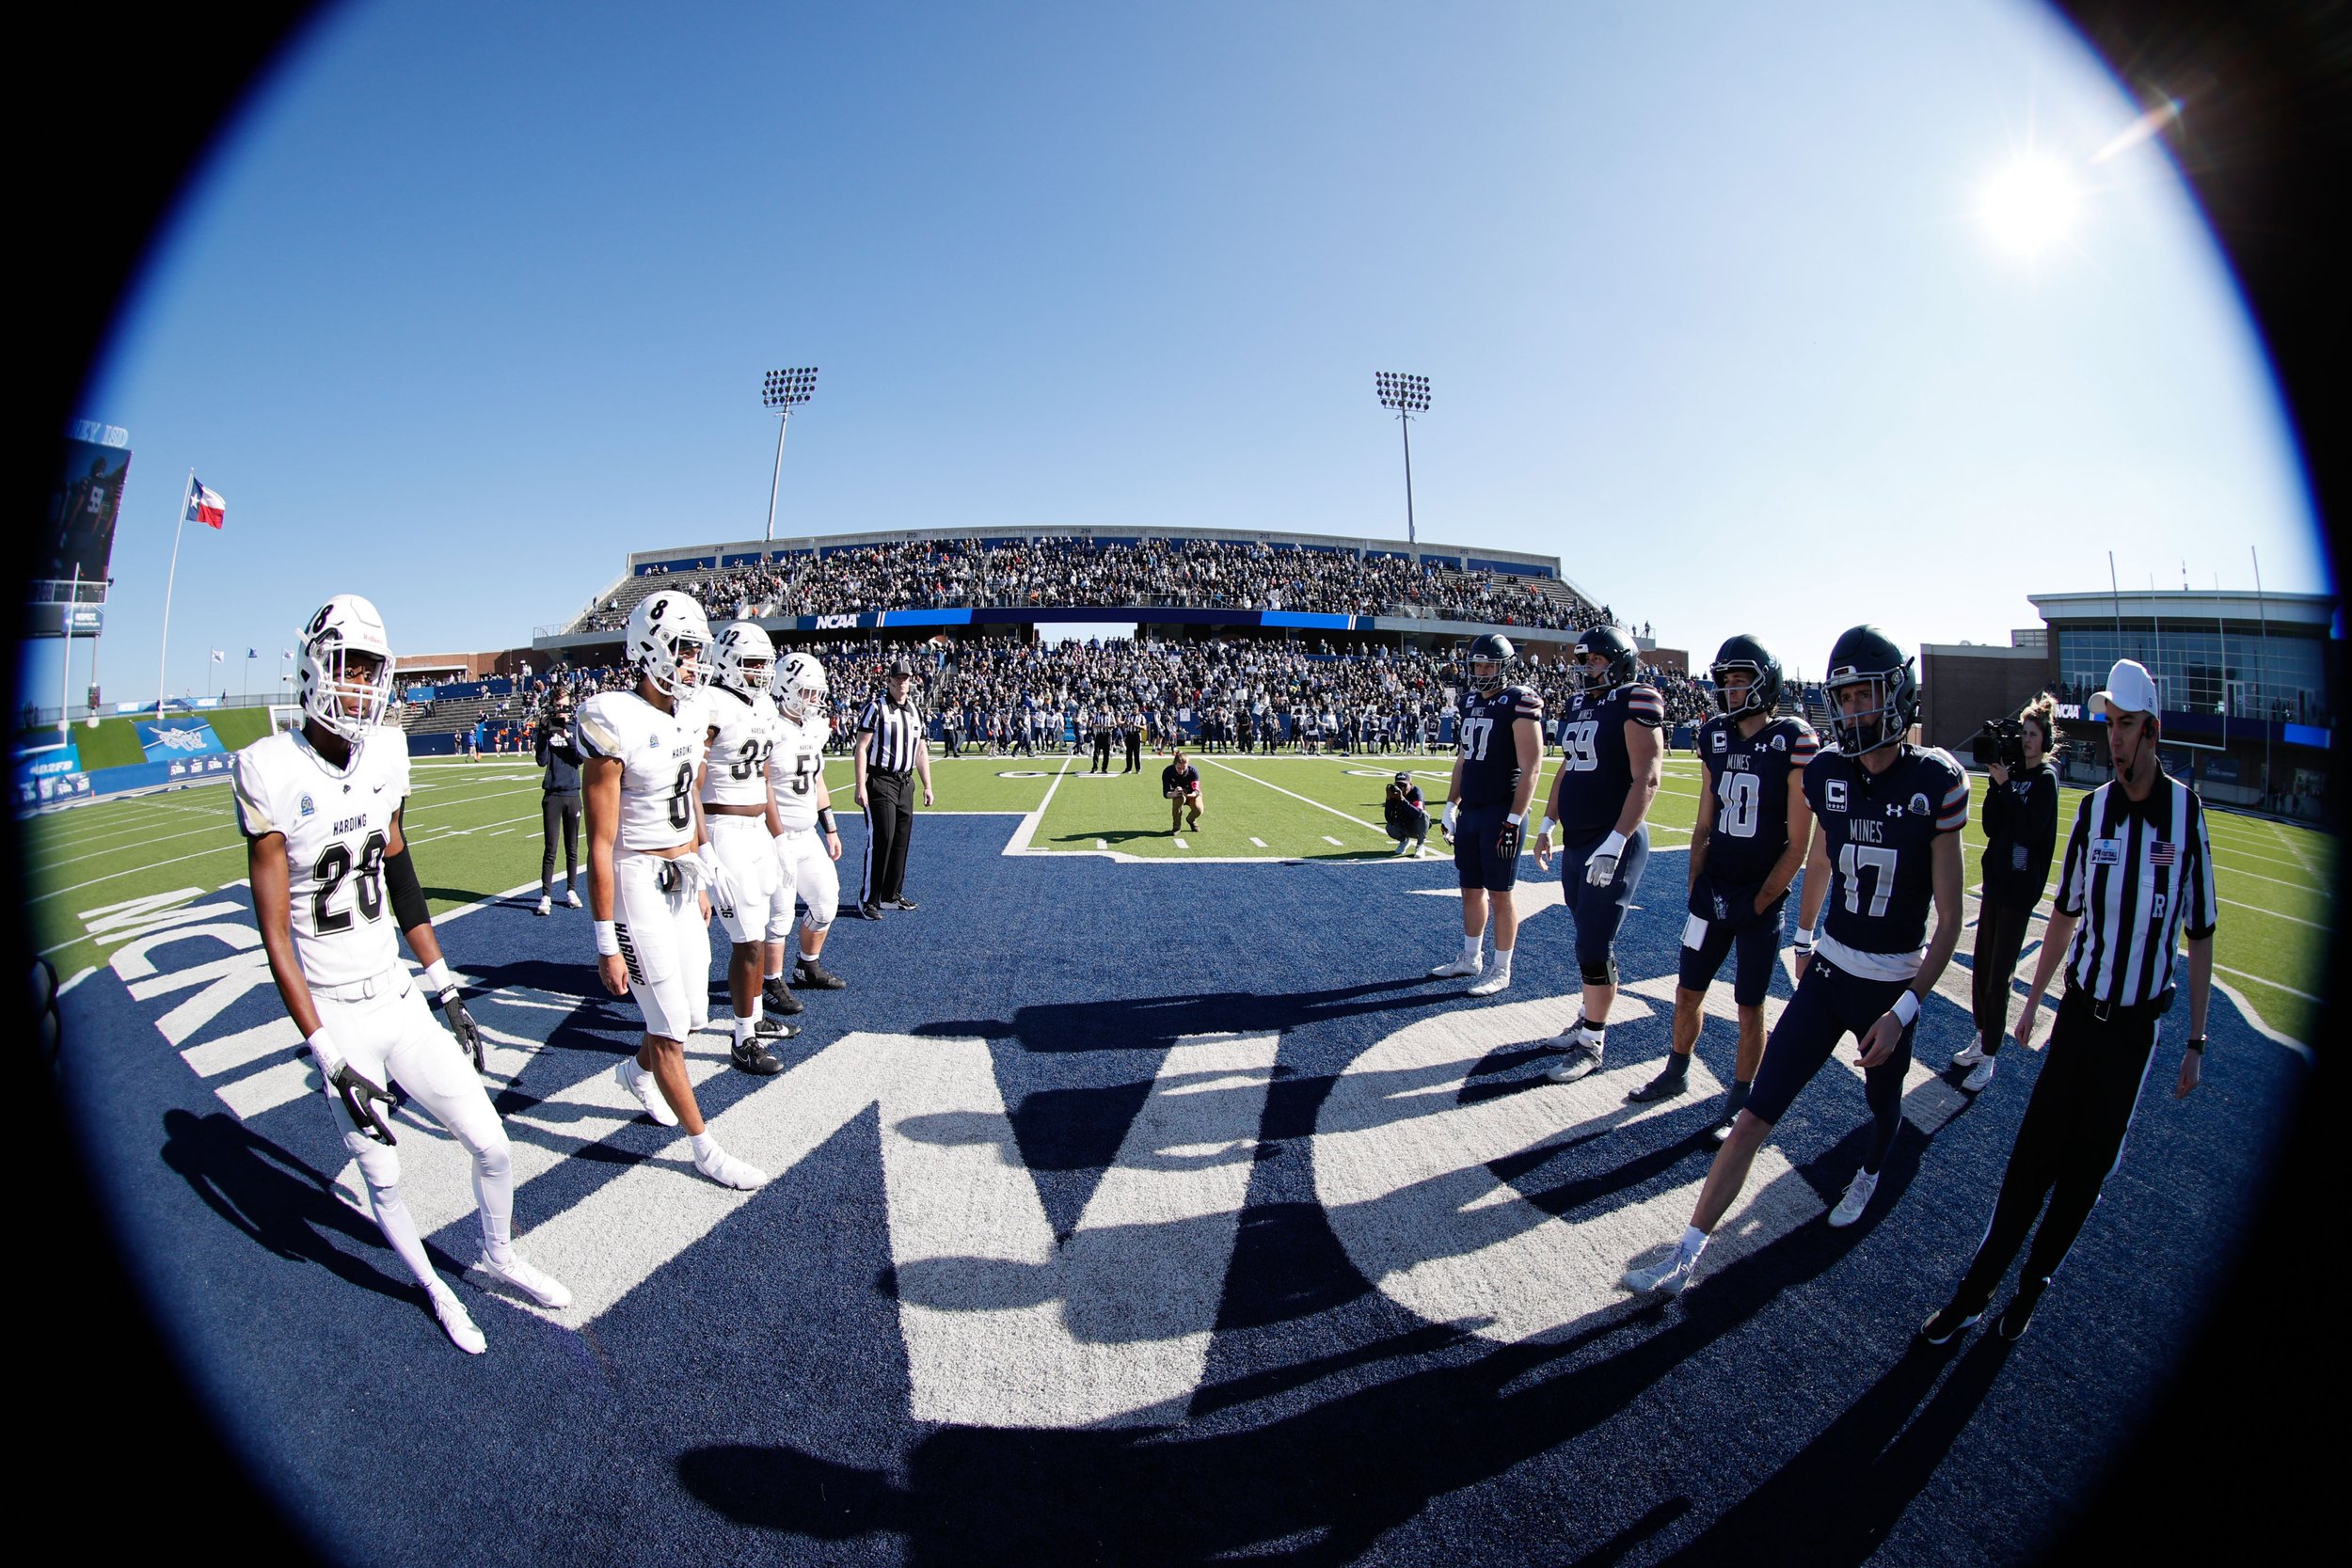  MCKINNEY, TEXAS - DECEMBER 16: EDITORS NOTE: image has been taken with a fisheye lens) The coin toss takes place before the game between the Colorado School of Mines Orediggers and the Harding Bisons during the Division II Football Championship held